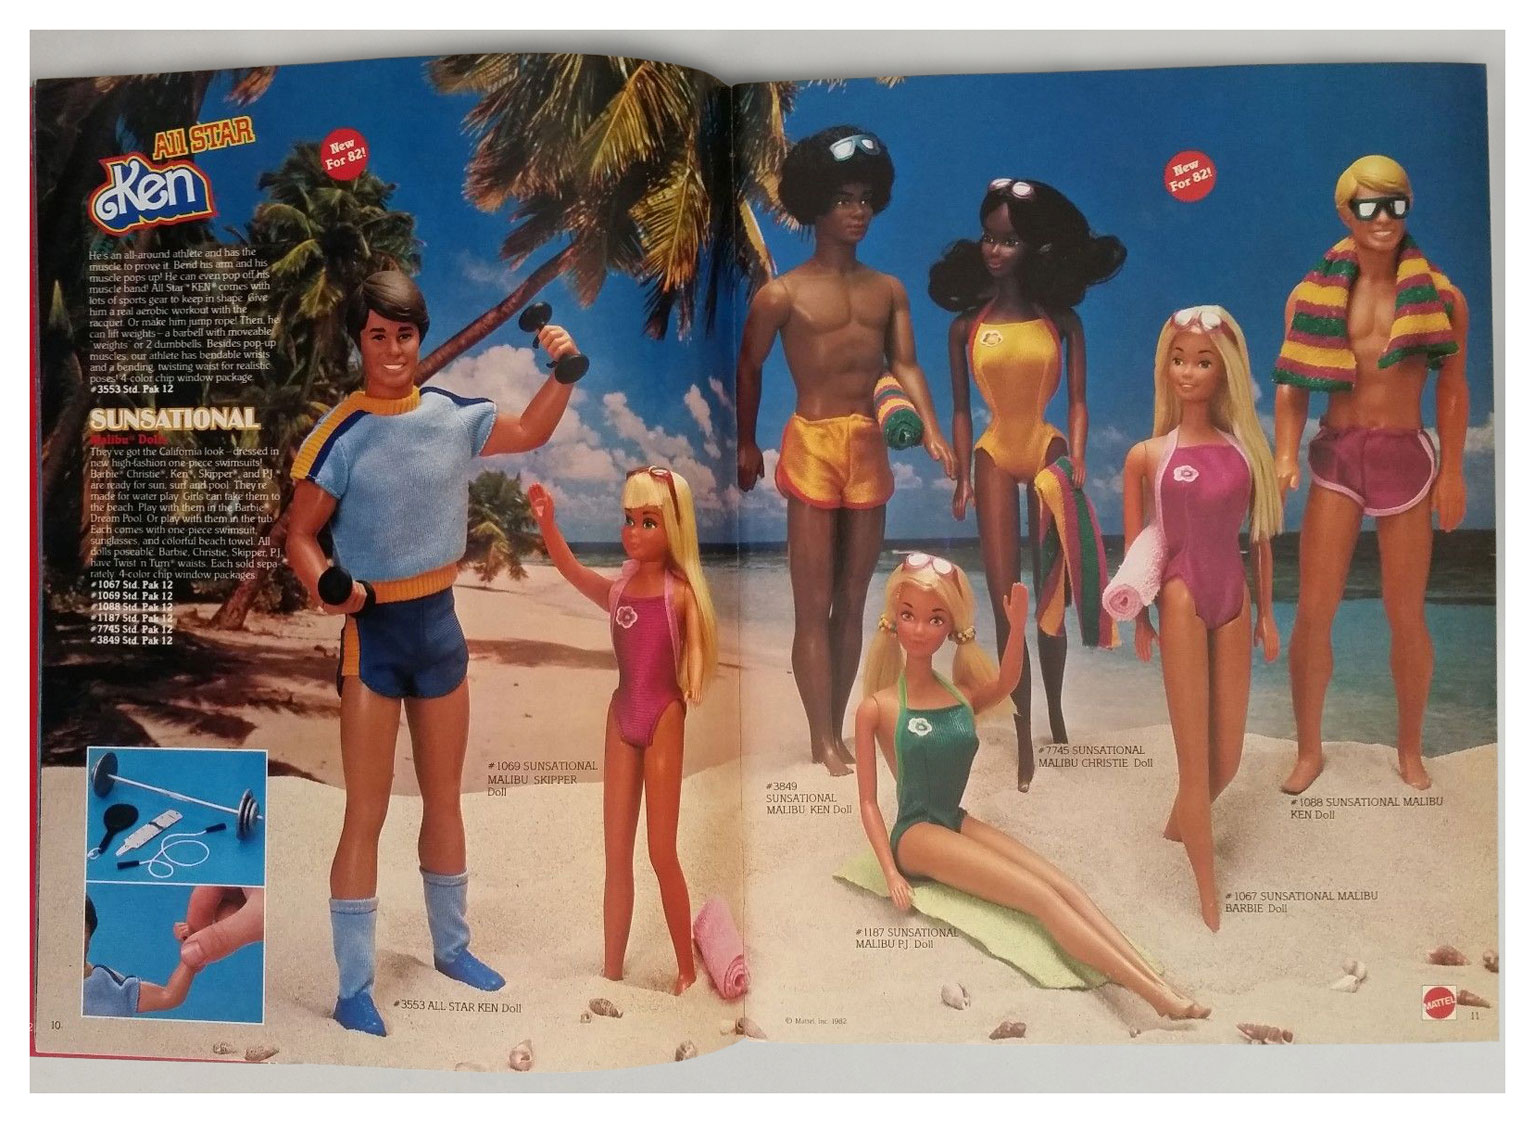 From 1982 Mattel Success For All Seasons catalogue